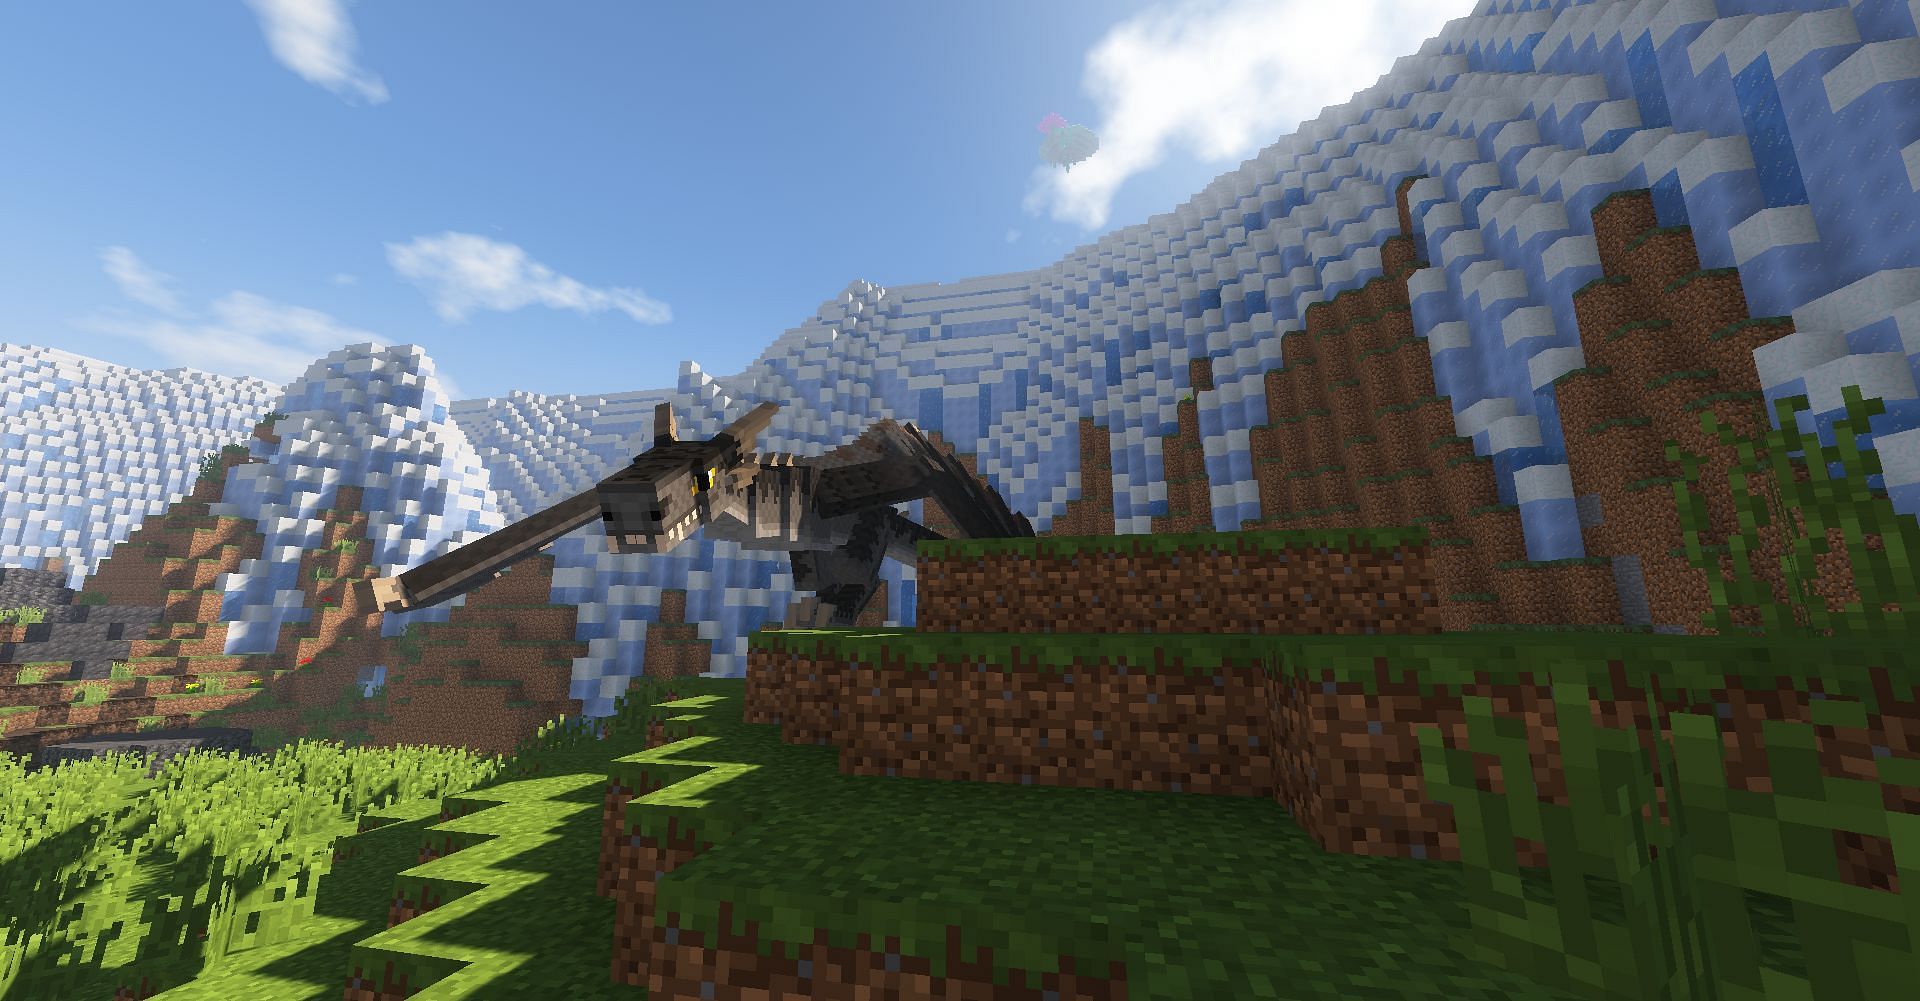 Ice and Fire is one of the best modpacks for Minecraft (Image via CurseForge)